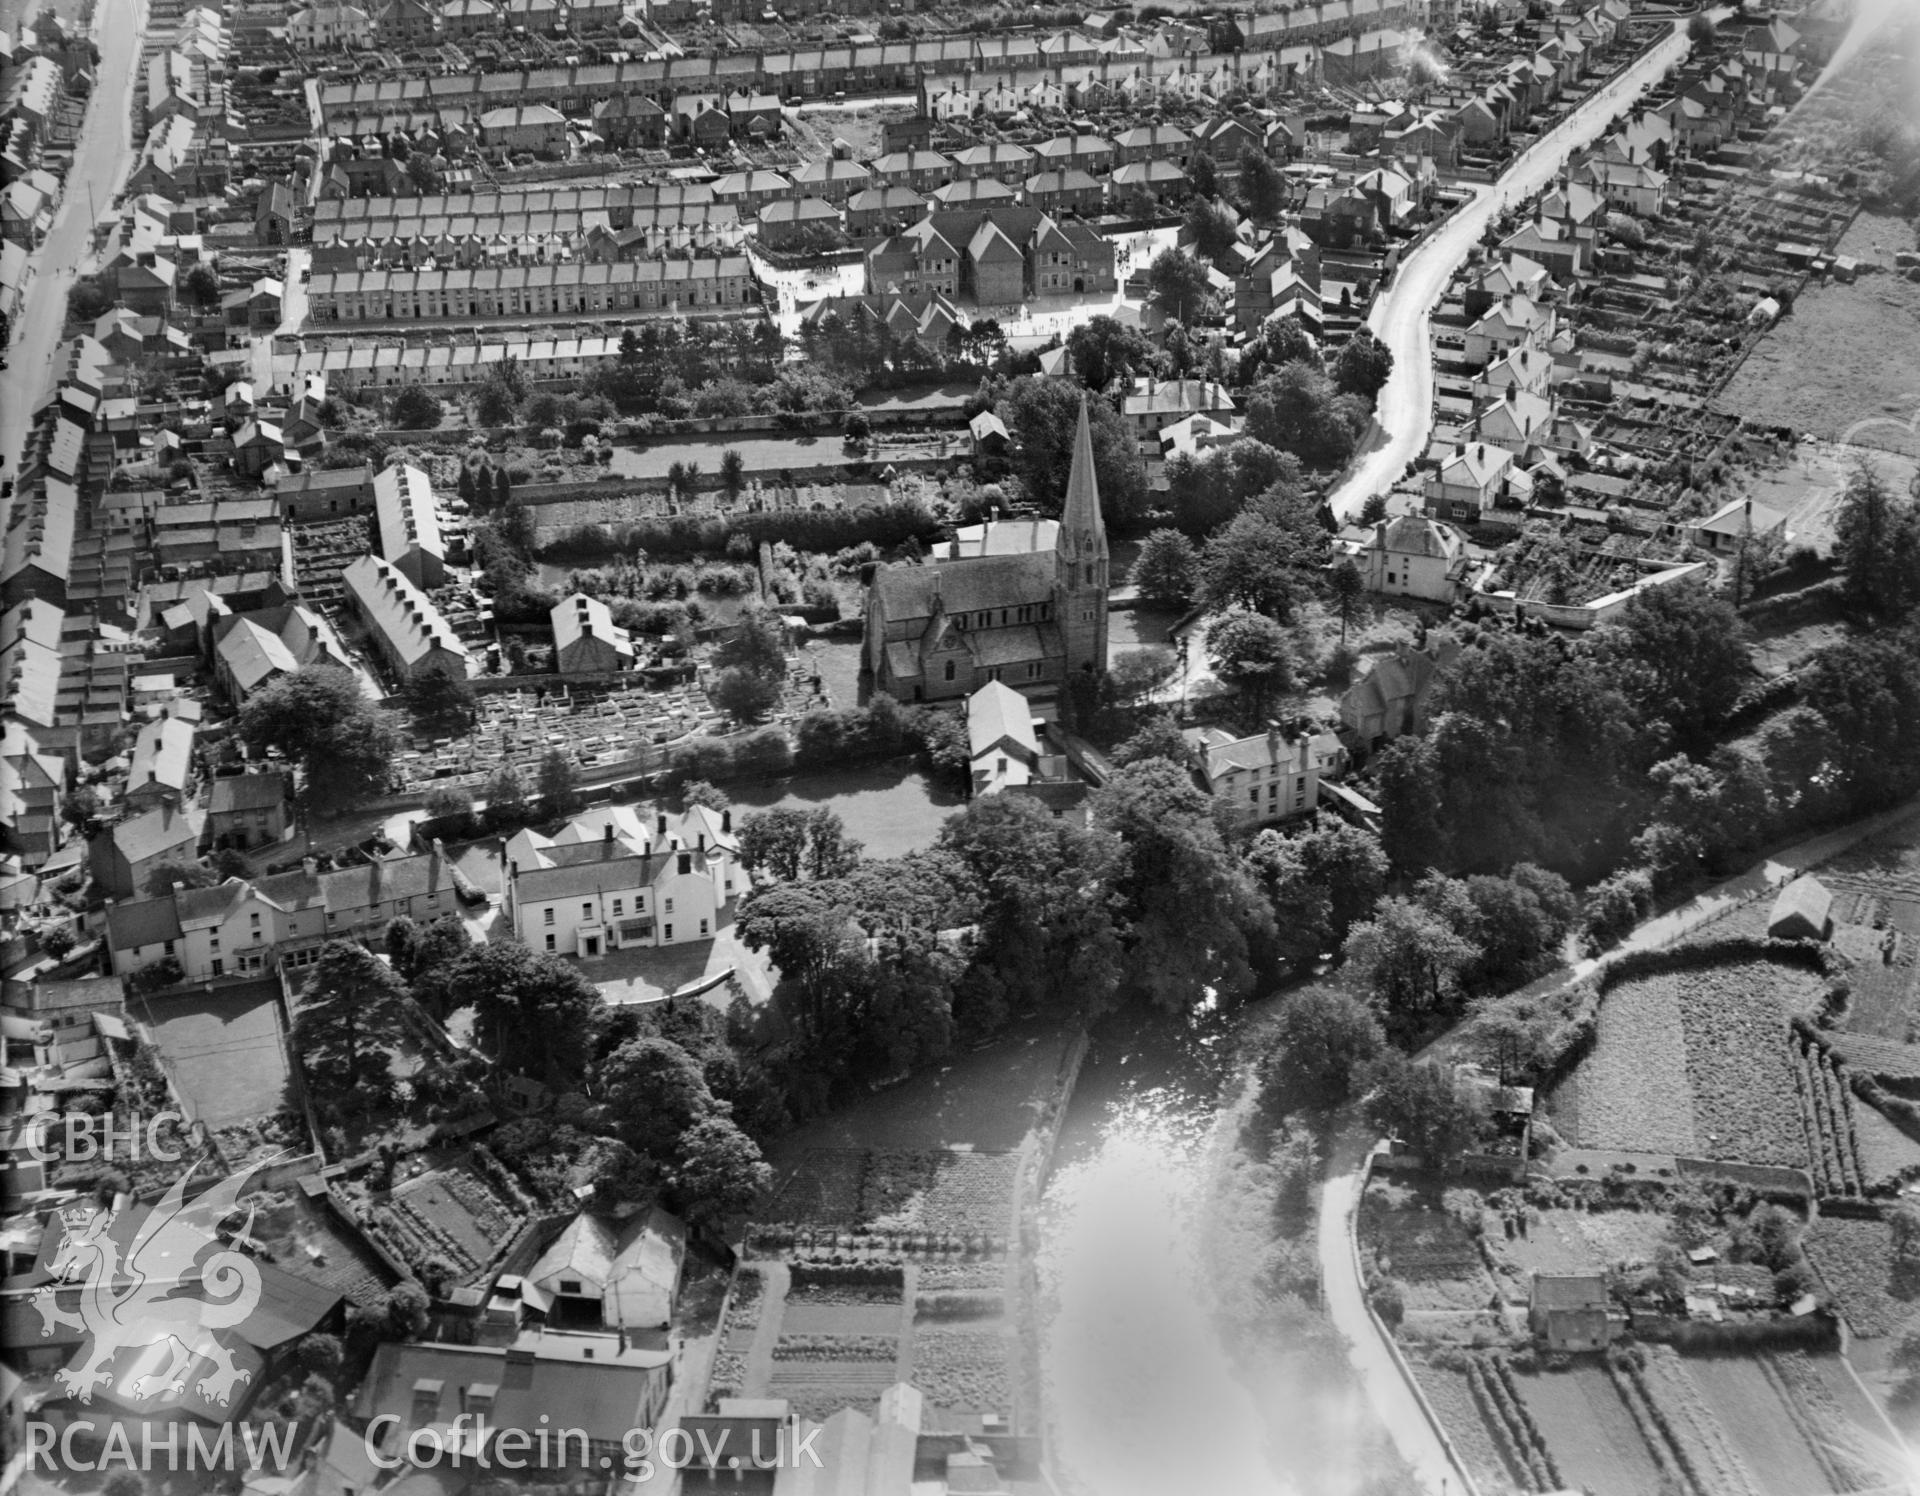 General view of Bridgend showing St Marys church, oblique aerial view. 5?x4? black and white glass plate negative.